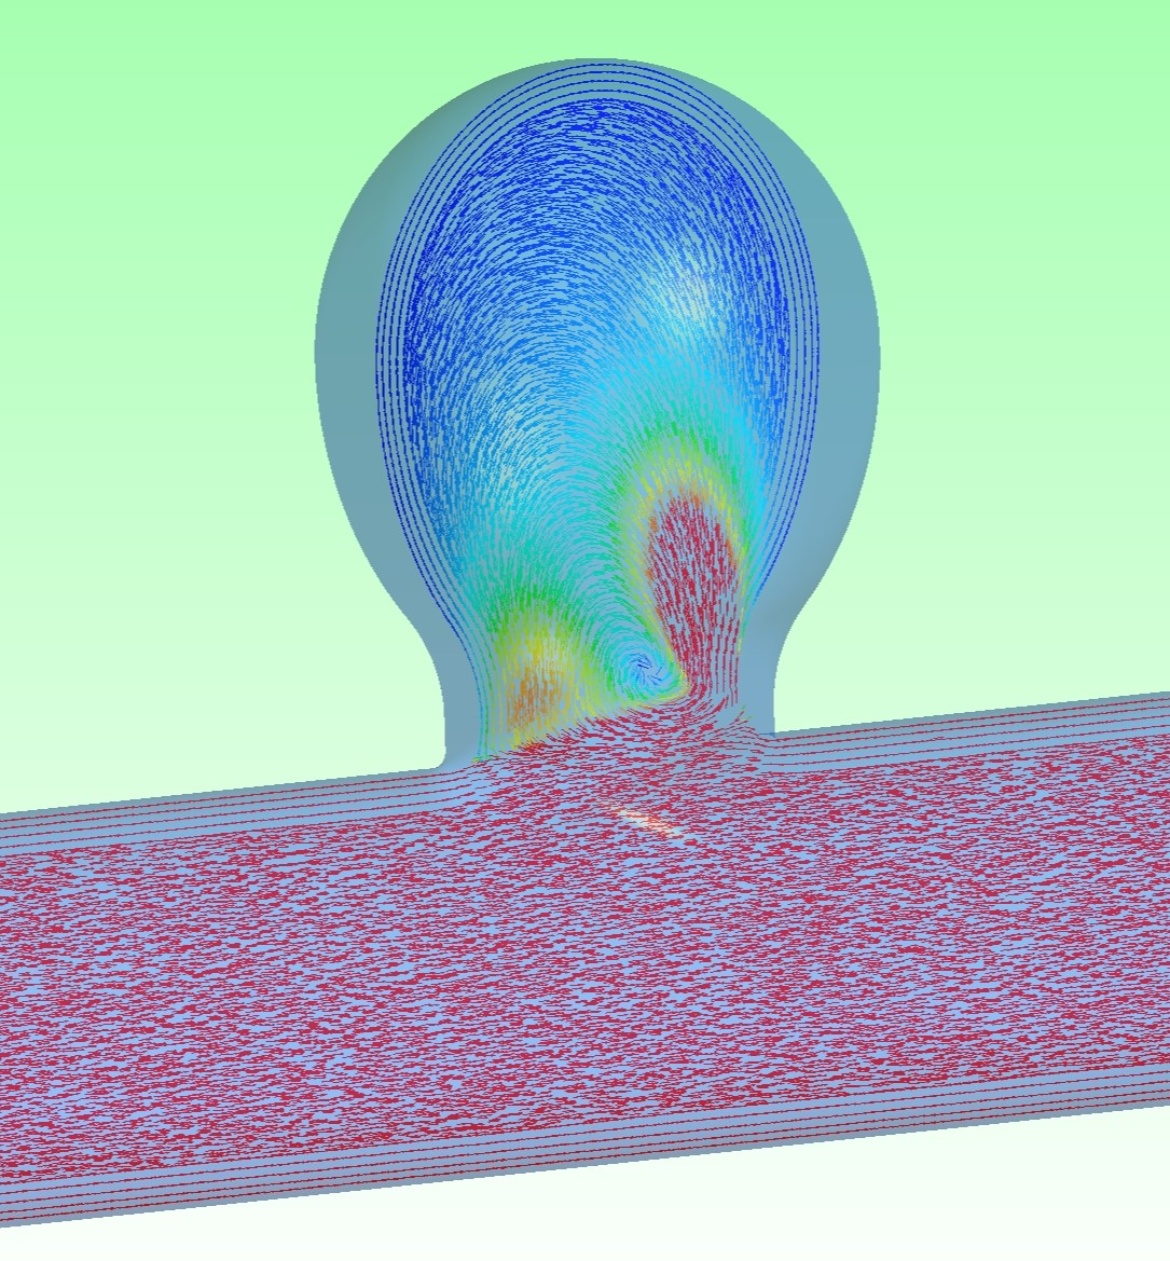 Numerical simulation of flow velocity vectors in an aneurysm model